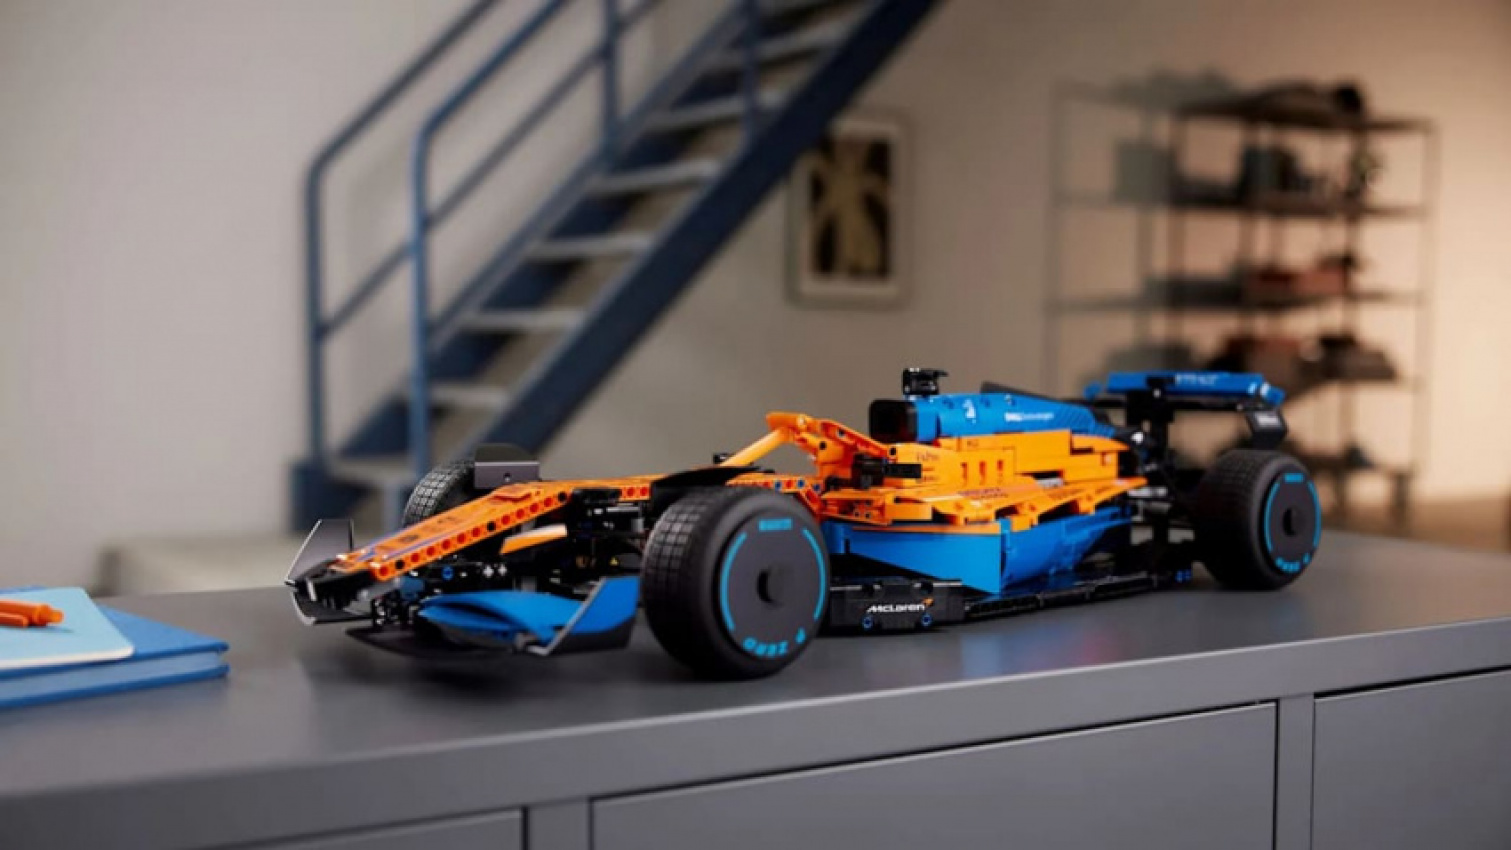 autos, cars, mclaren, toys/games, lego, motorsports, racing vehicles, the 2022 mclaren f1 car can be yours, in lego form